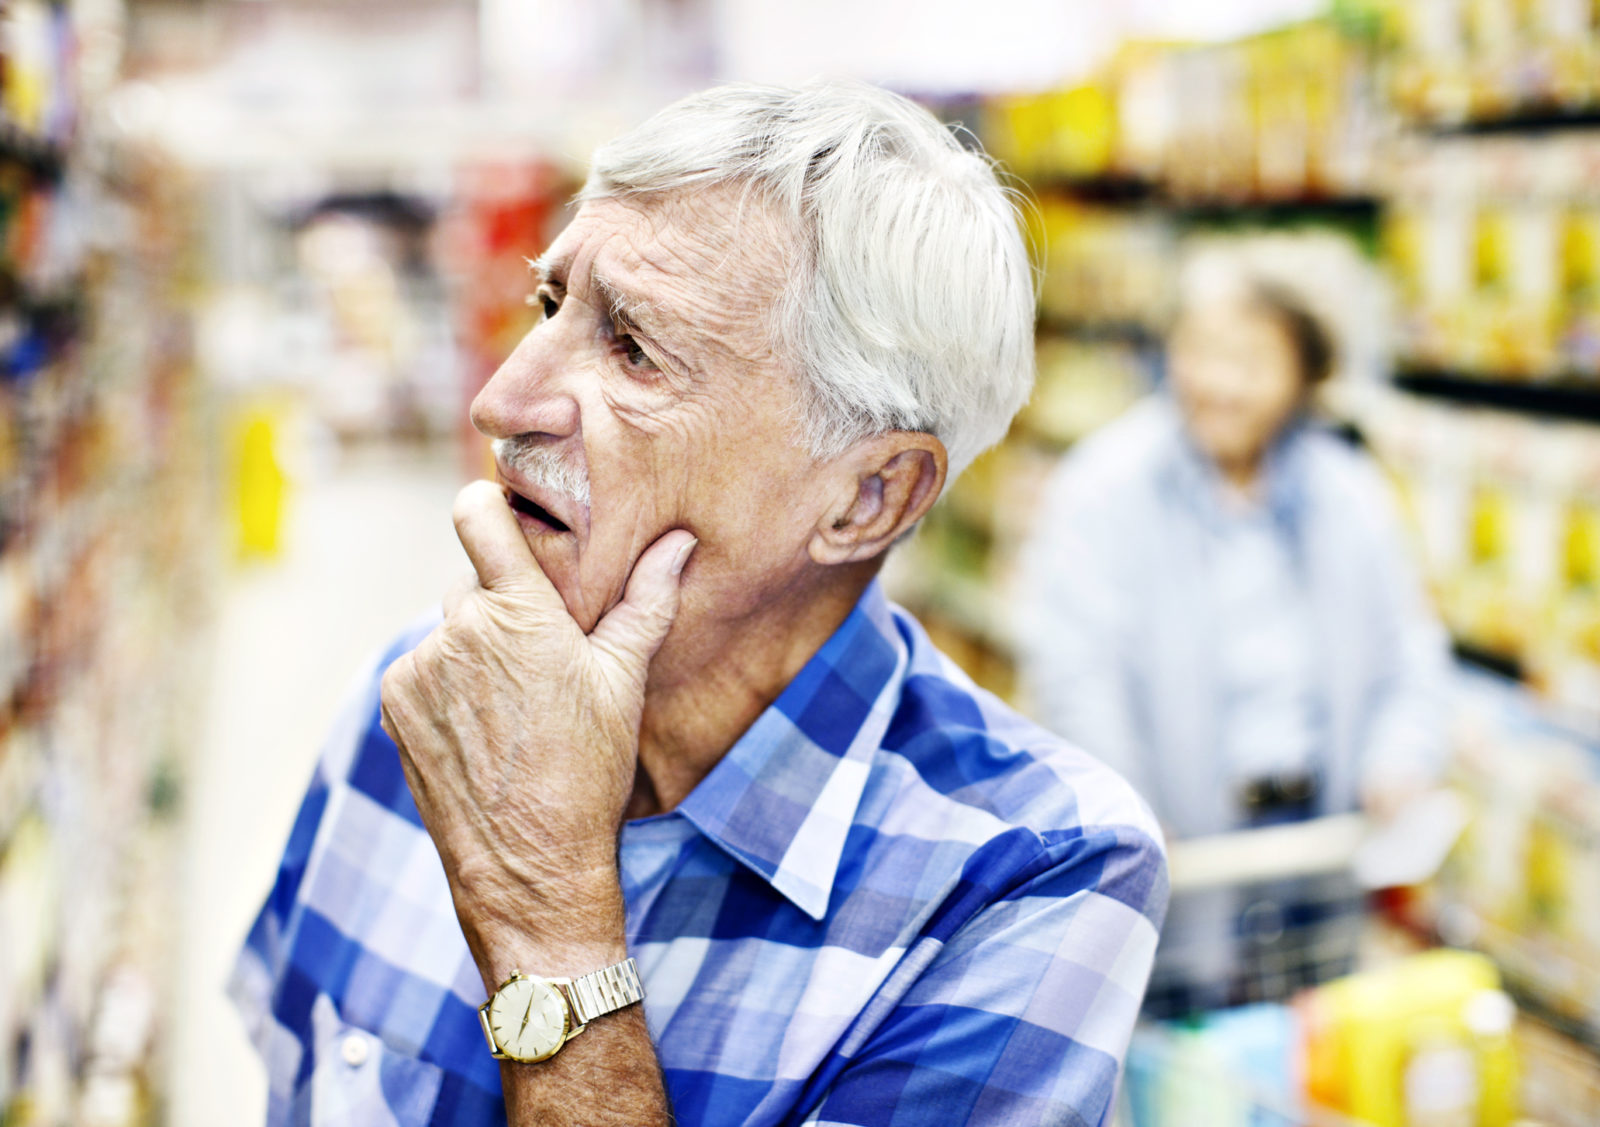 Senior man shopping at grocery store trying to remember what it is he's supposed to get